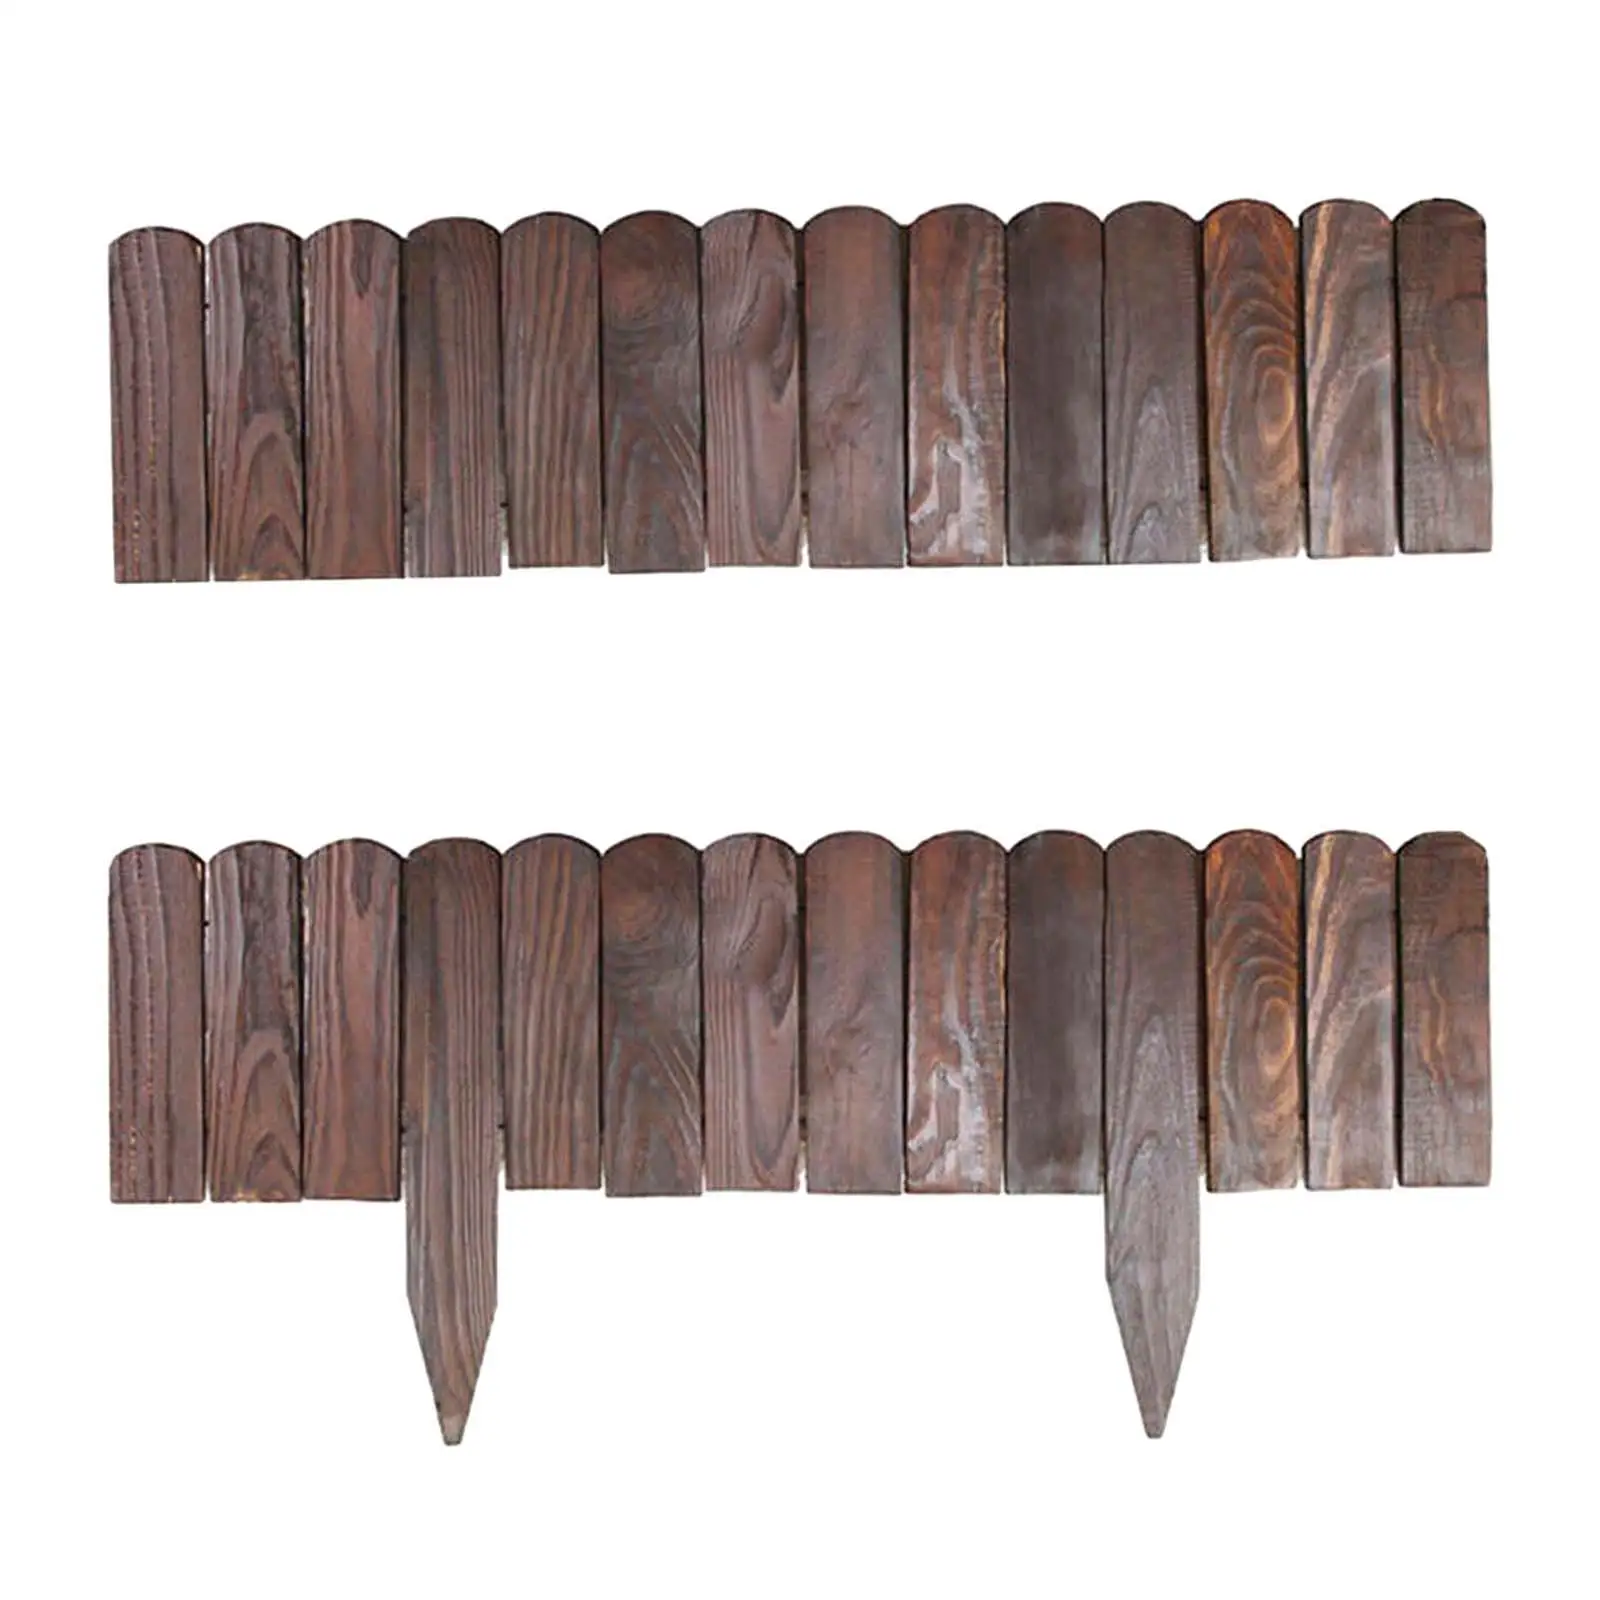 Decorative Garden Fence Detachable Fence Border for Lawn Landscaping Walkway